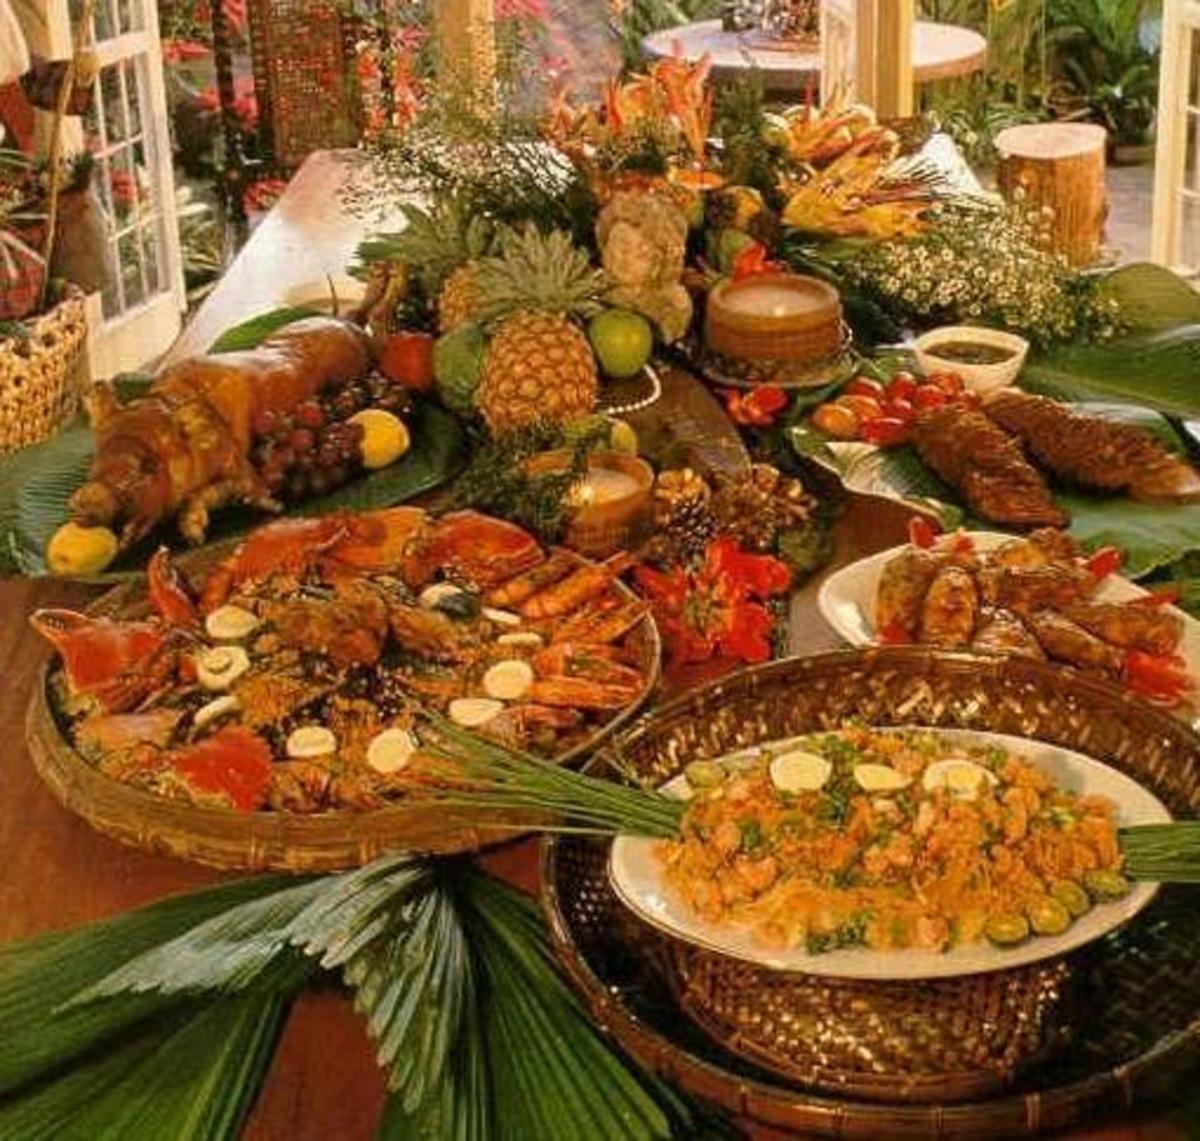 Filipino Traditions on New Year's Eve Owlcation